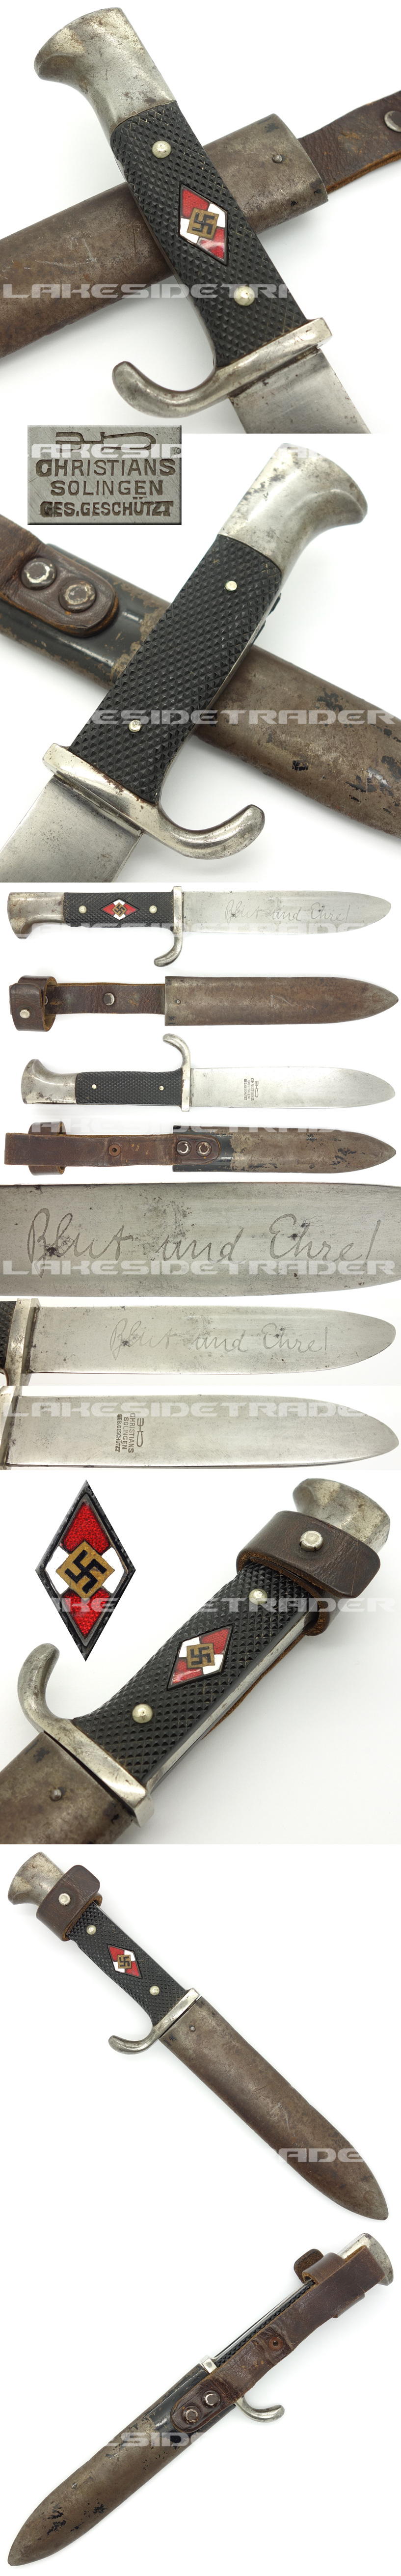 Early Hitler Youth Knife by Christianswerk